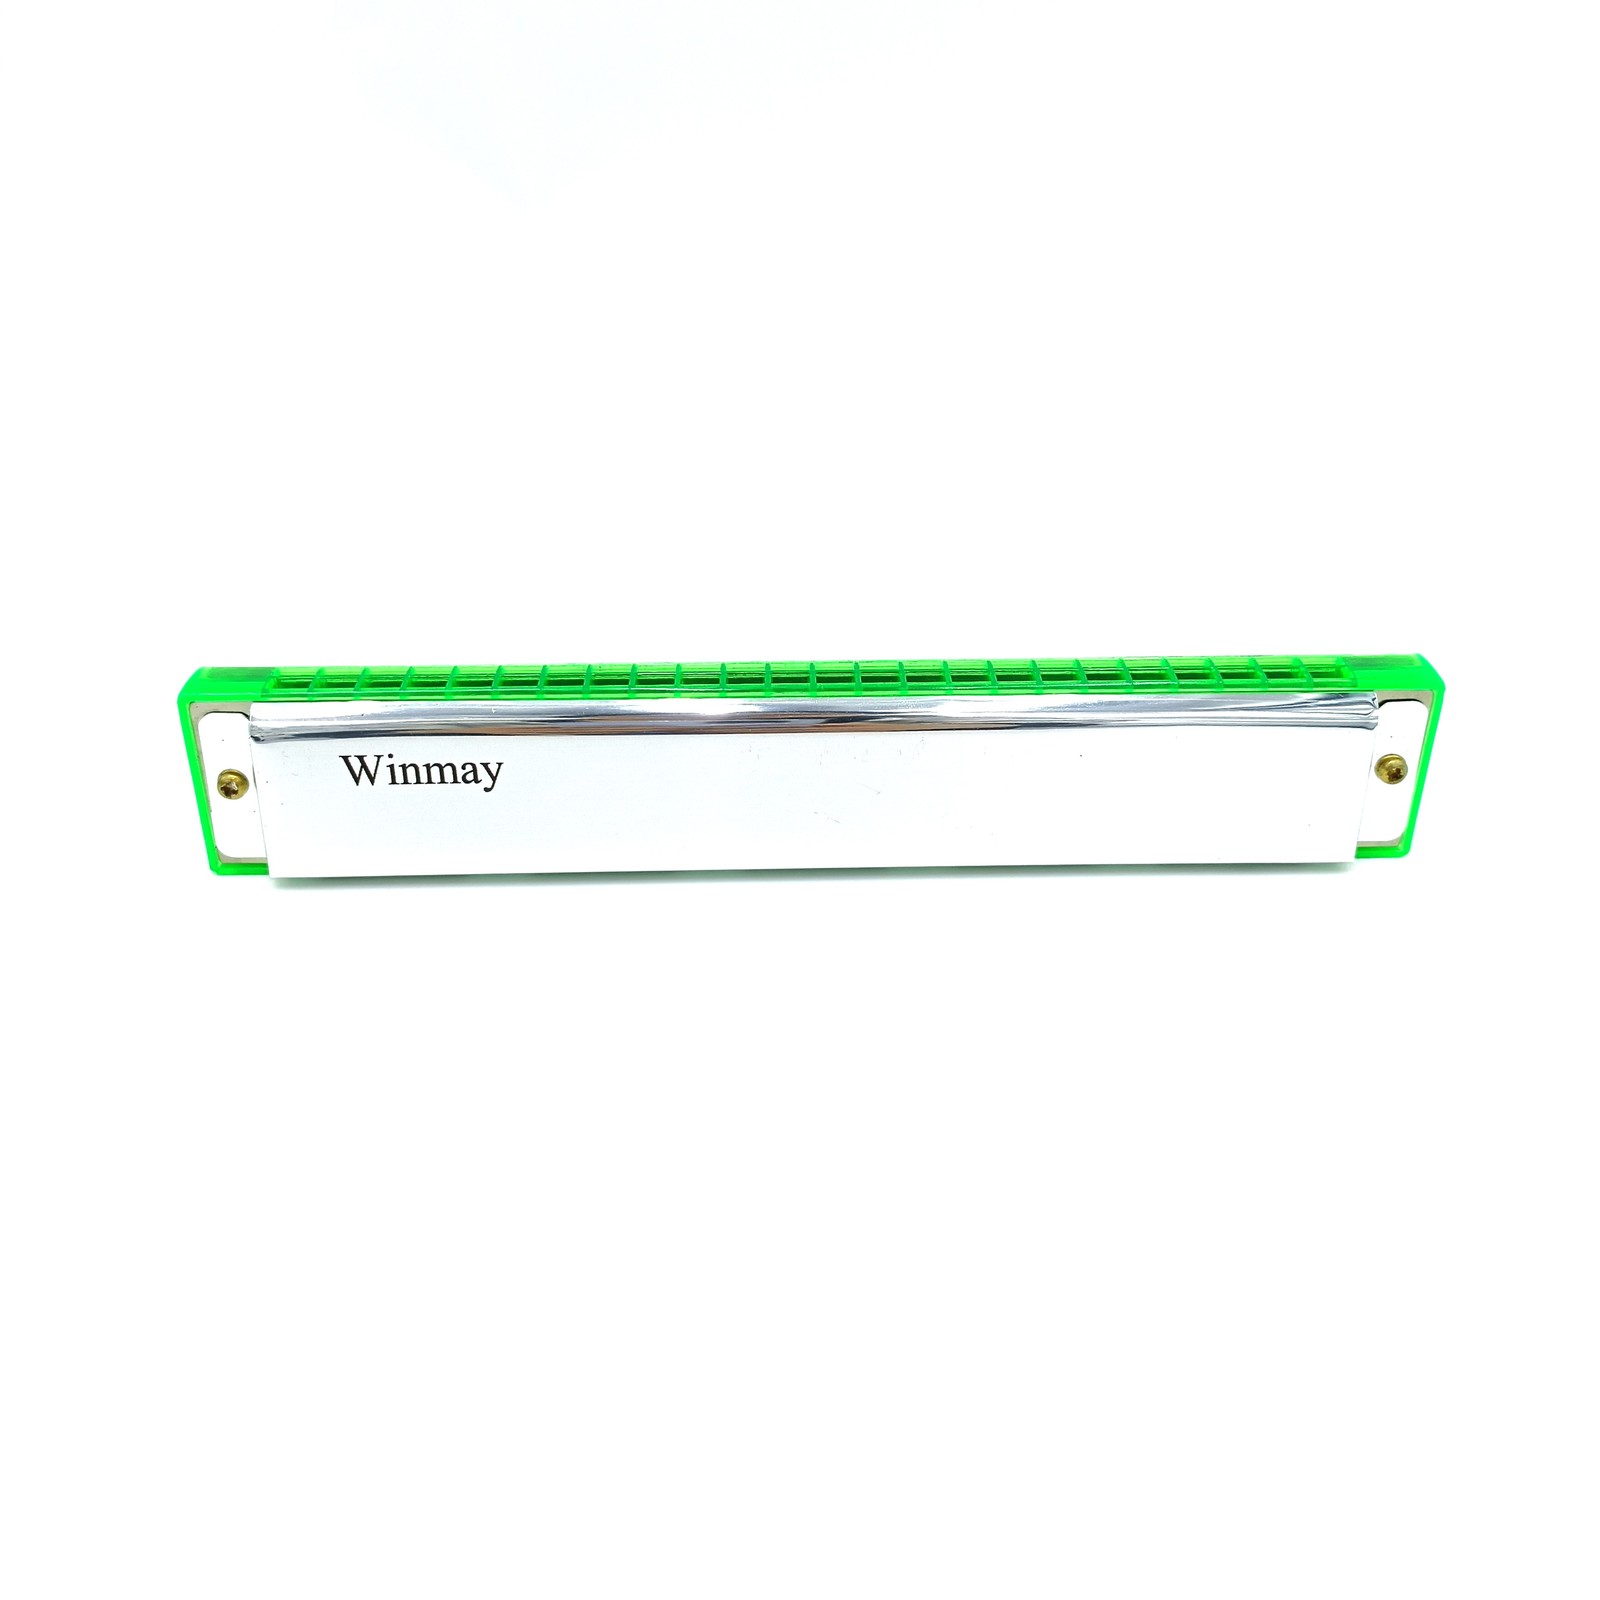 Primary image for Winmay harmonicas Harmonica for Beginner with Carrying Plastic Case, Green